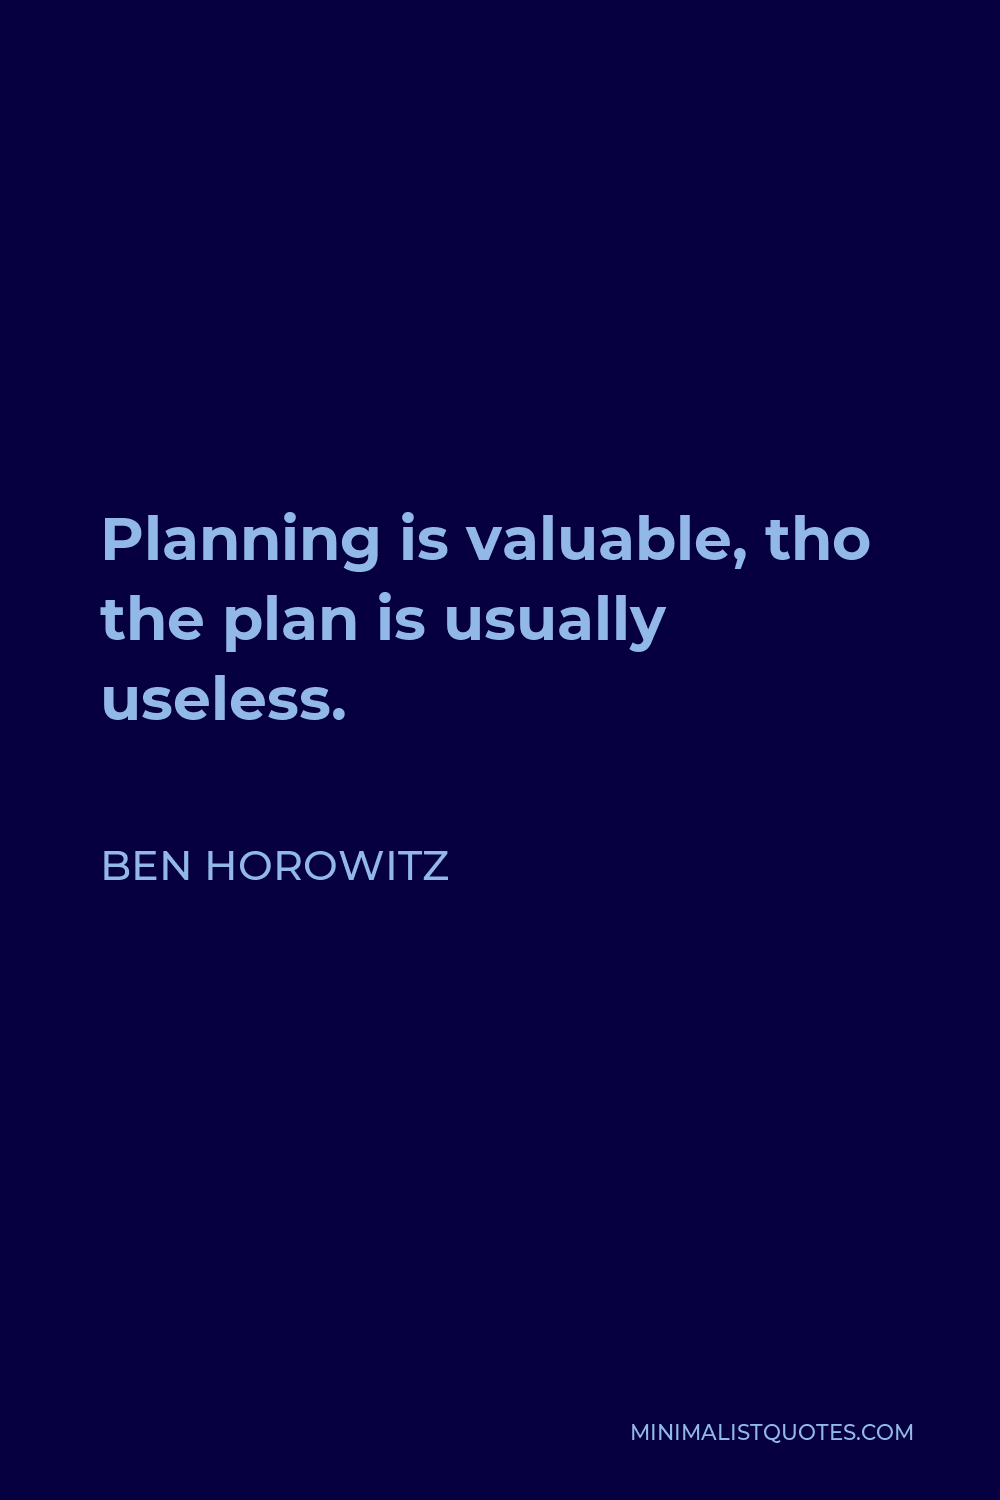 Ben Horowitz Quote - Planning is valuable, tho the plan is usually useless.